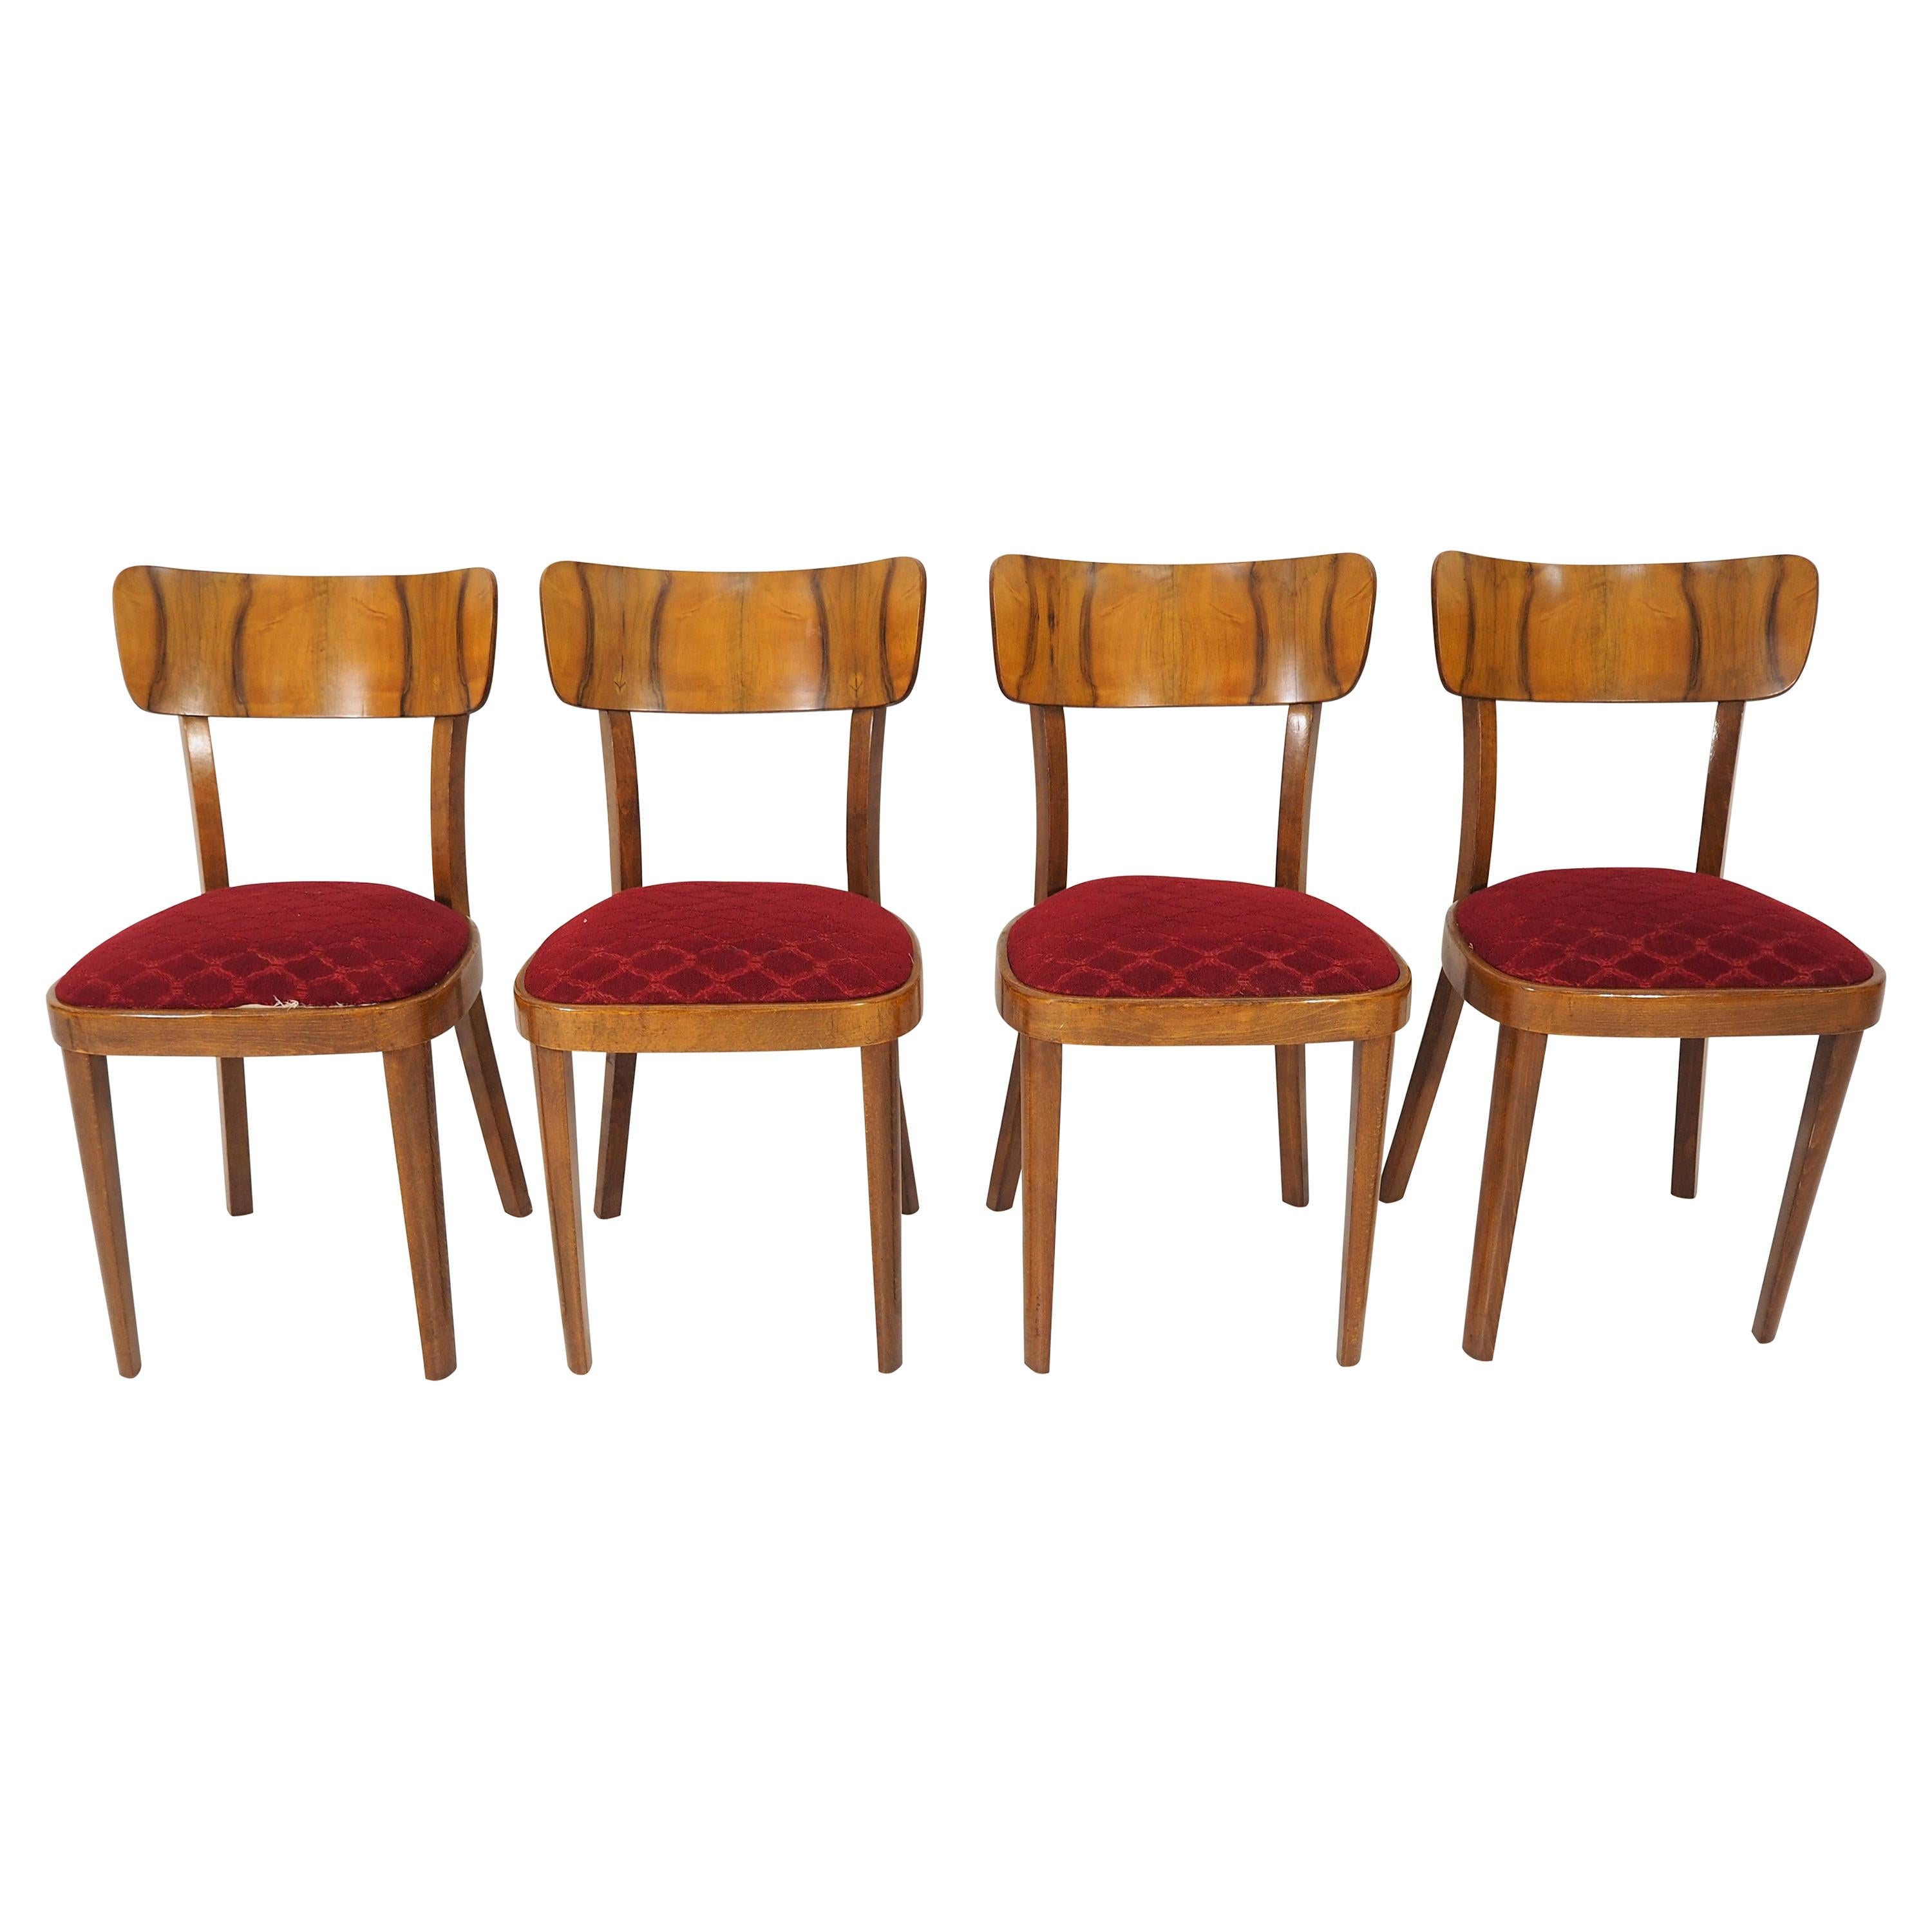 Vintage Art Deco Dining Chairs, circa 1960, Set of 4 For Sale